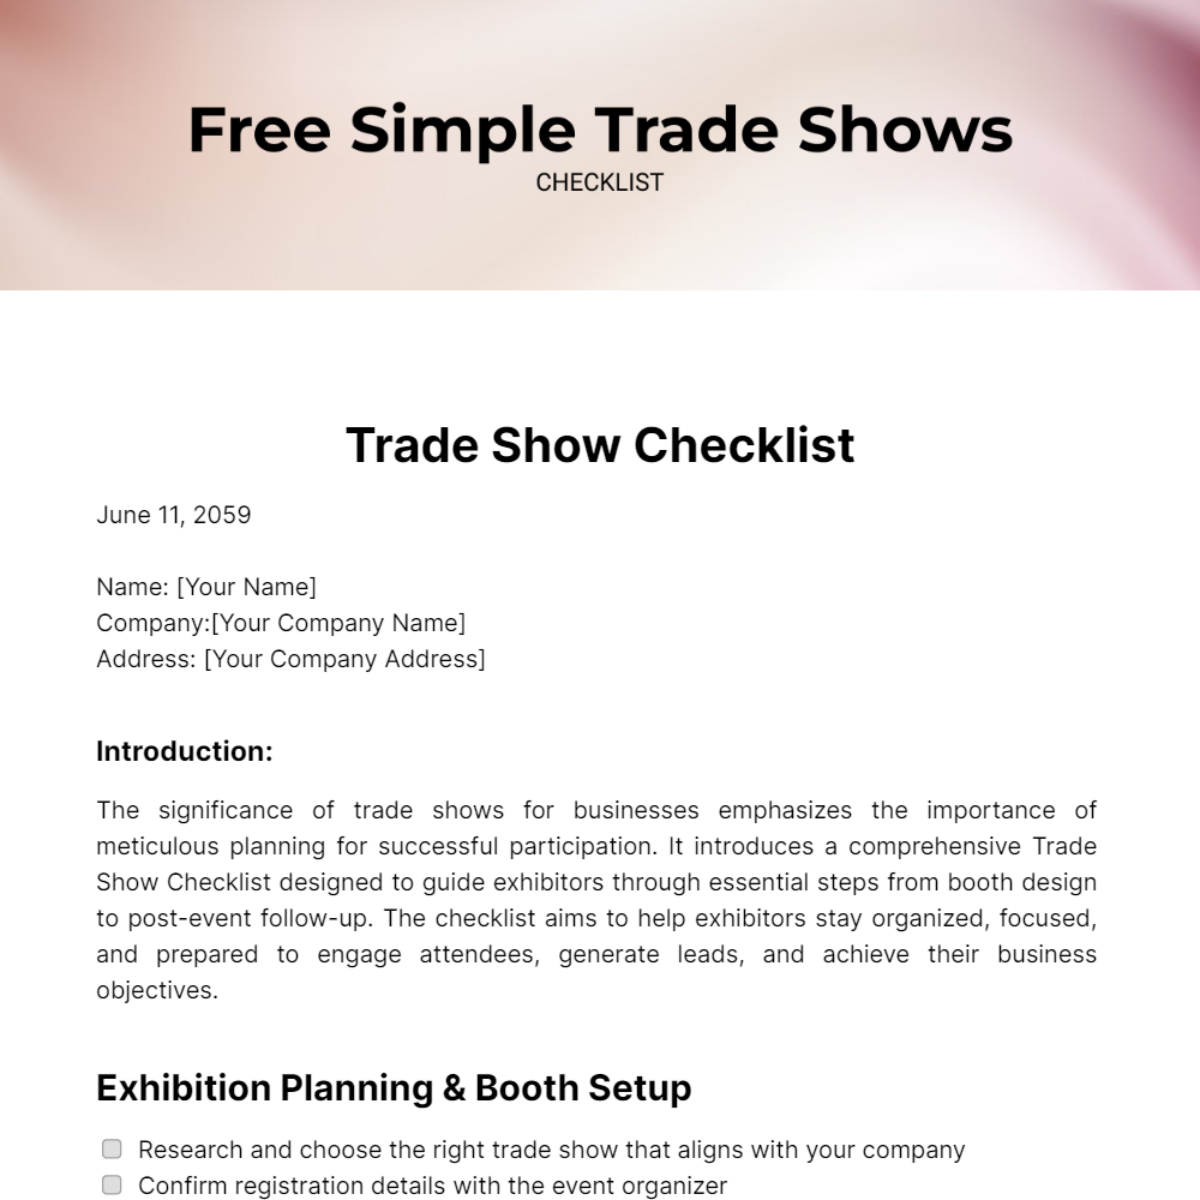 Free Simple Checklist Trade Shows Template